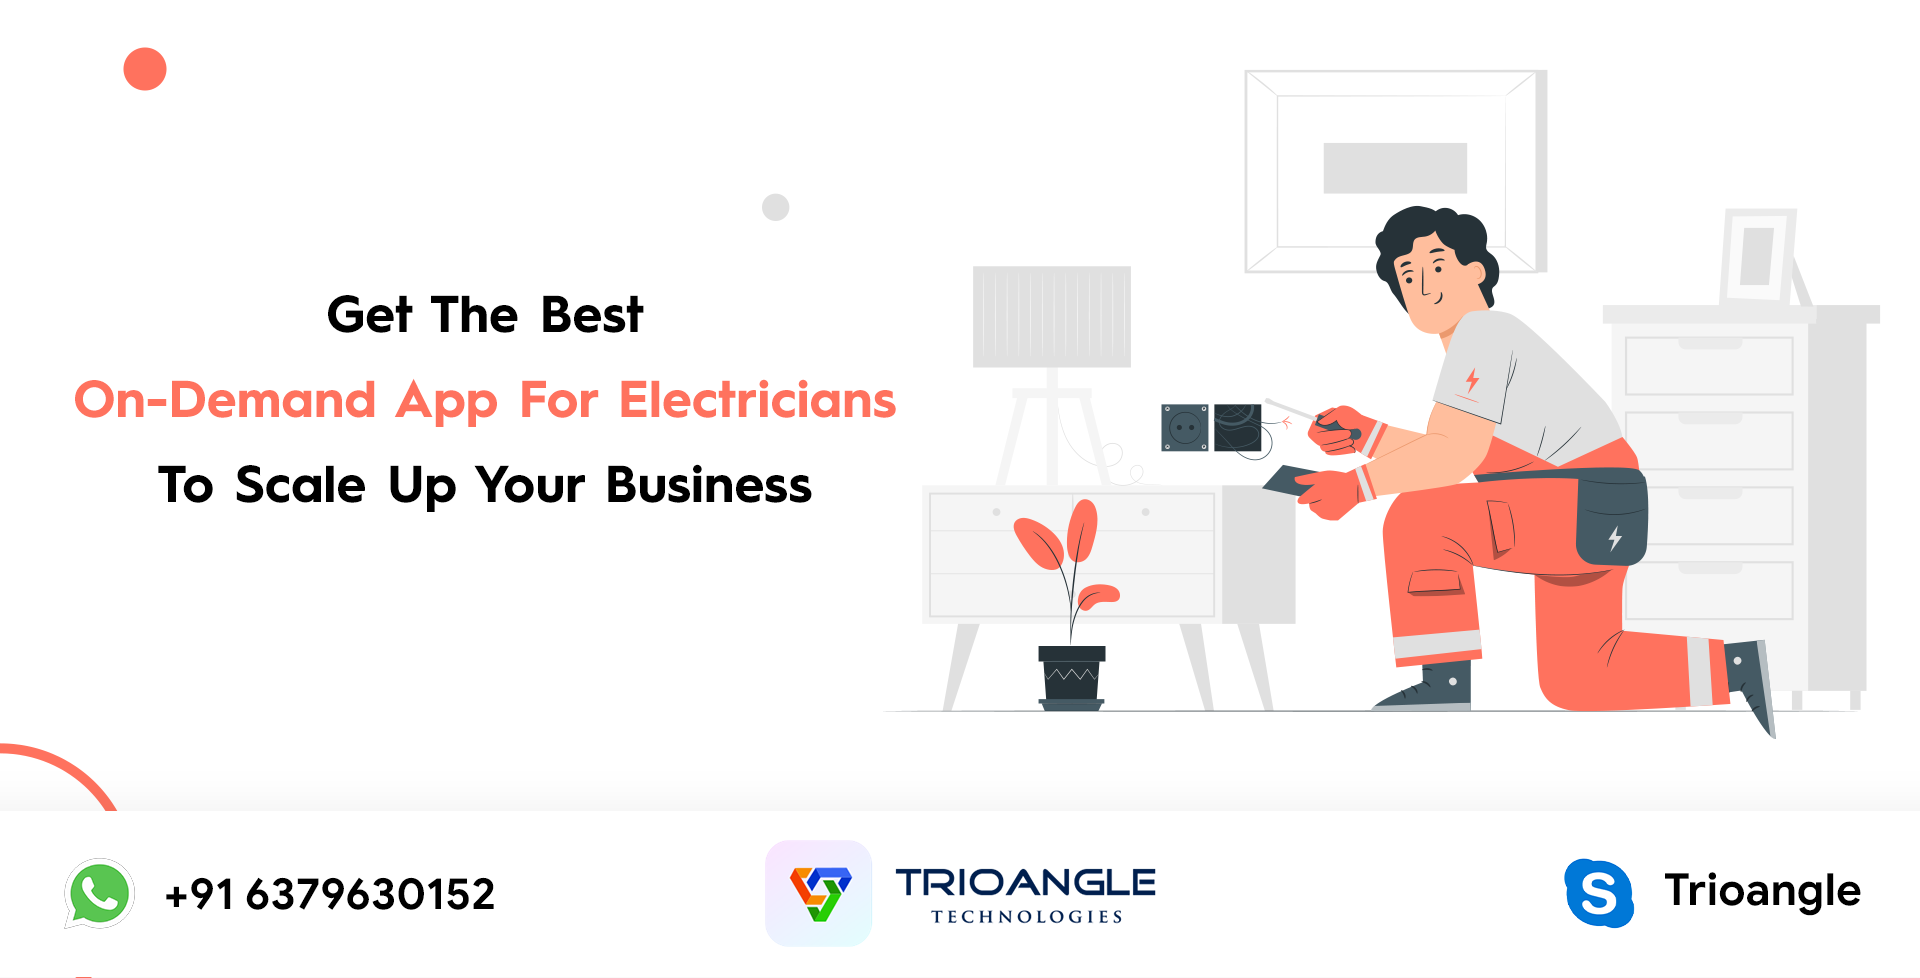 Get The Best On-Demand App For Electricians To Scale Up Your Business